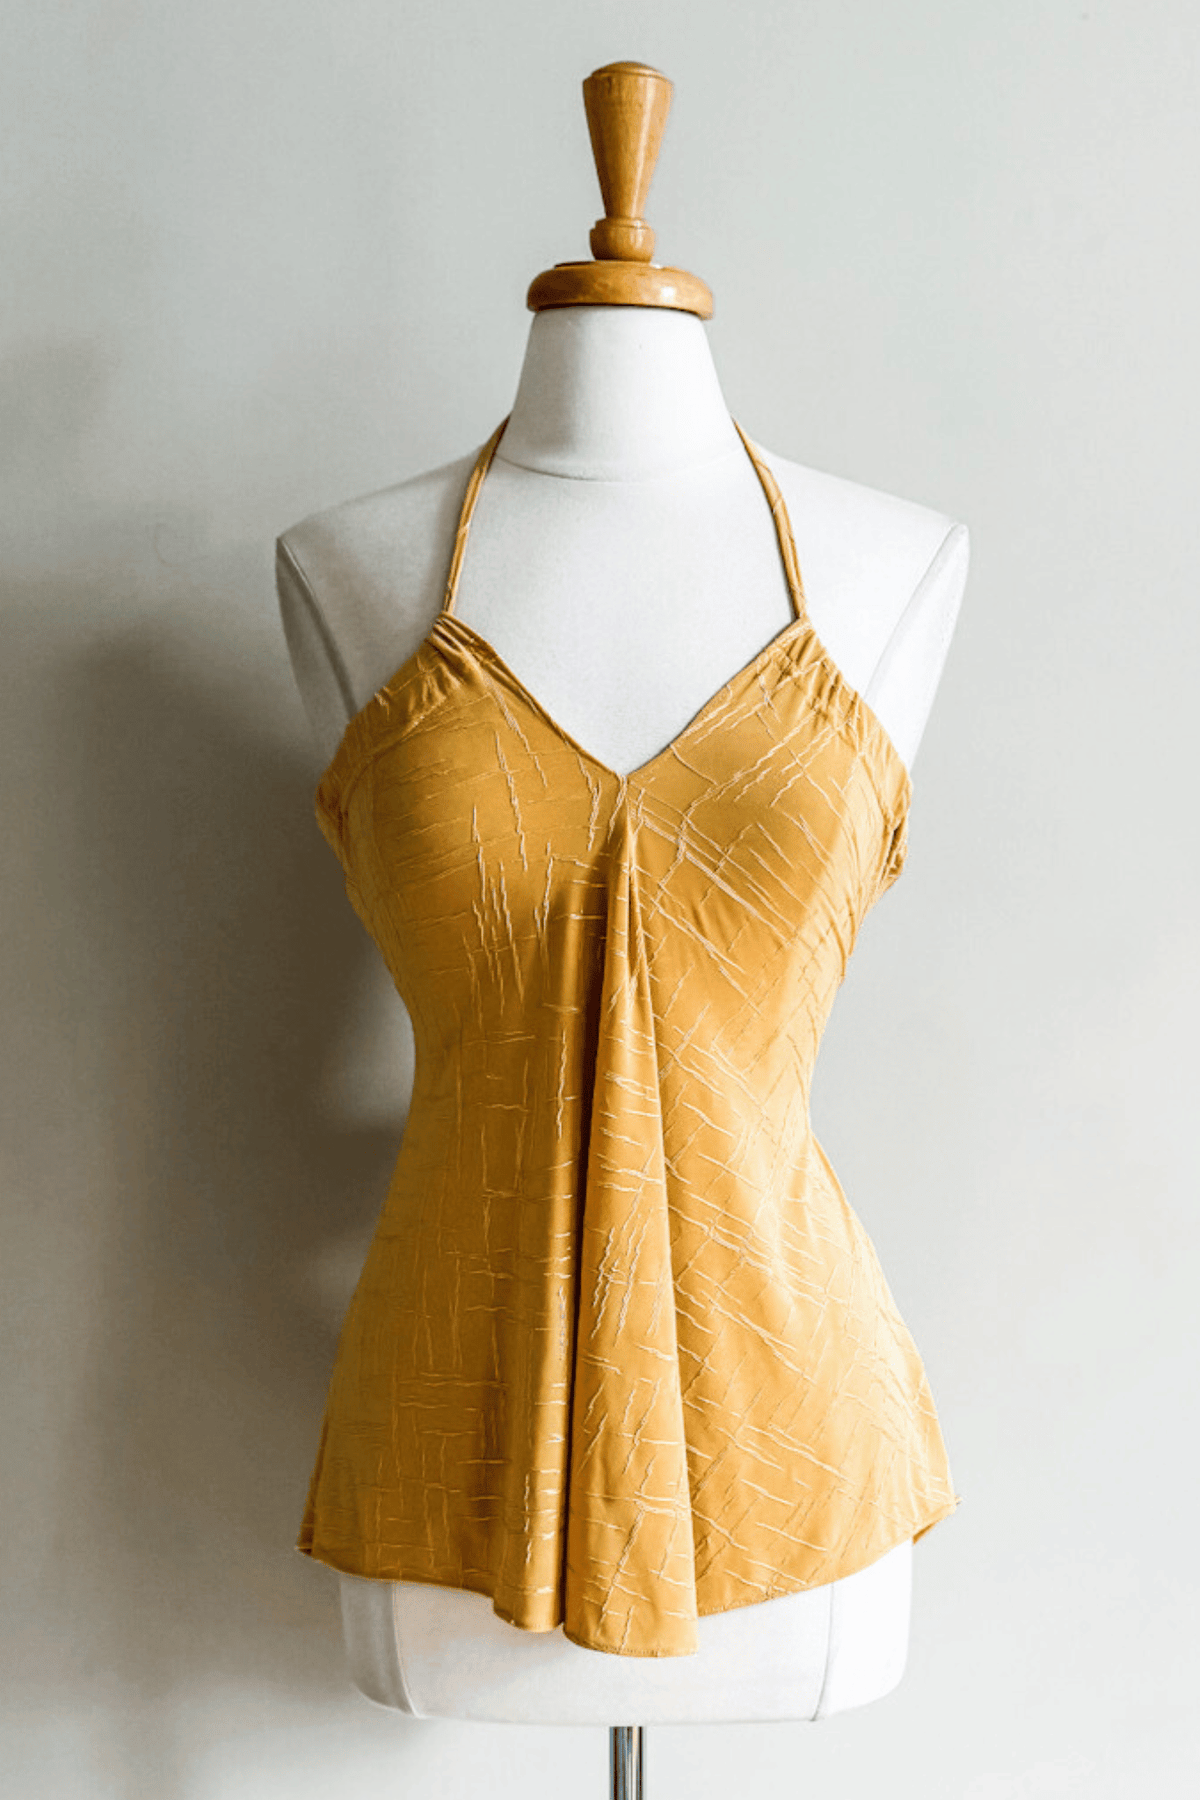 Evermore Top in Yellow Jacquard